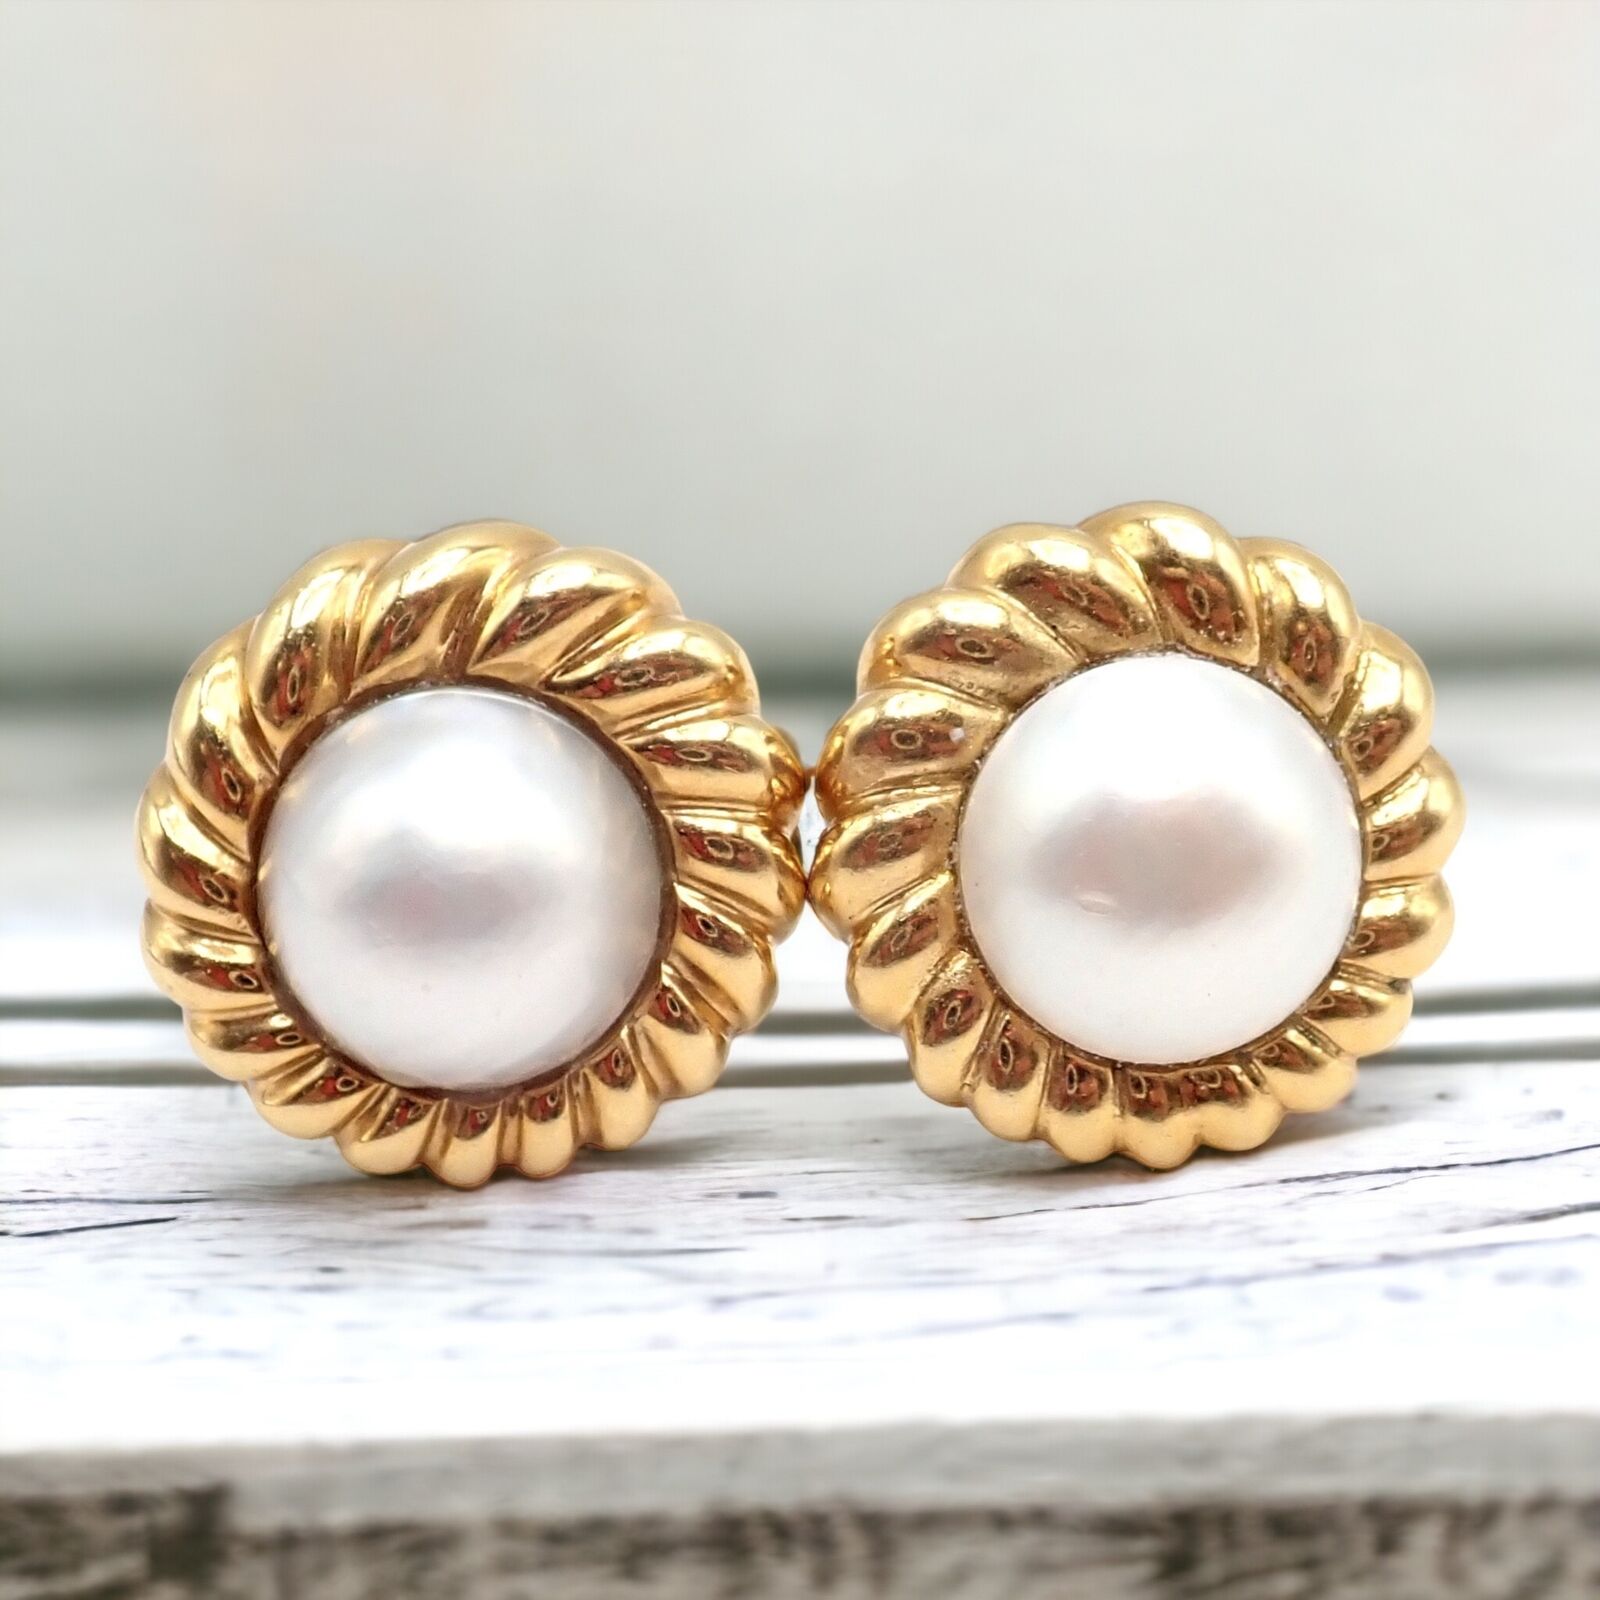 Tiffany & Co. Jewelry & Watches:Fine Jewelry:Earrings Vintage Authentic Tiffany & Co 18k Yellow Gold Mabe Pearl Rope Earrings 1987